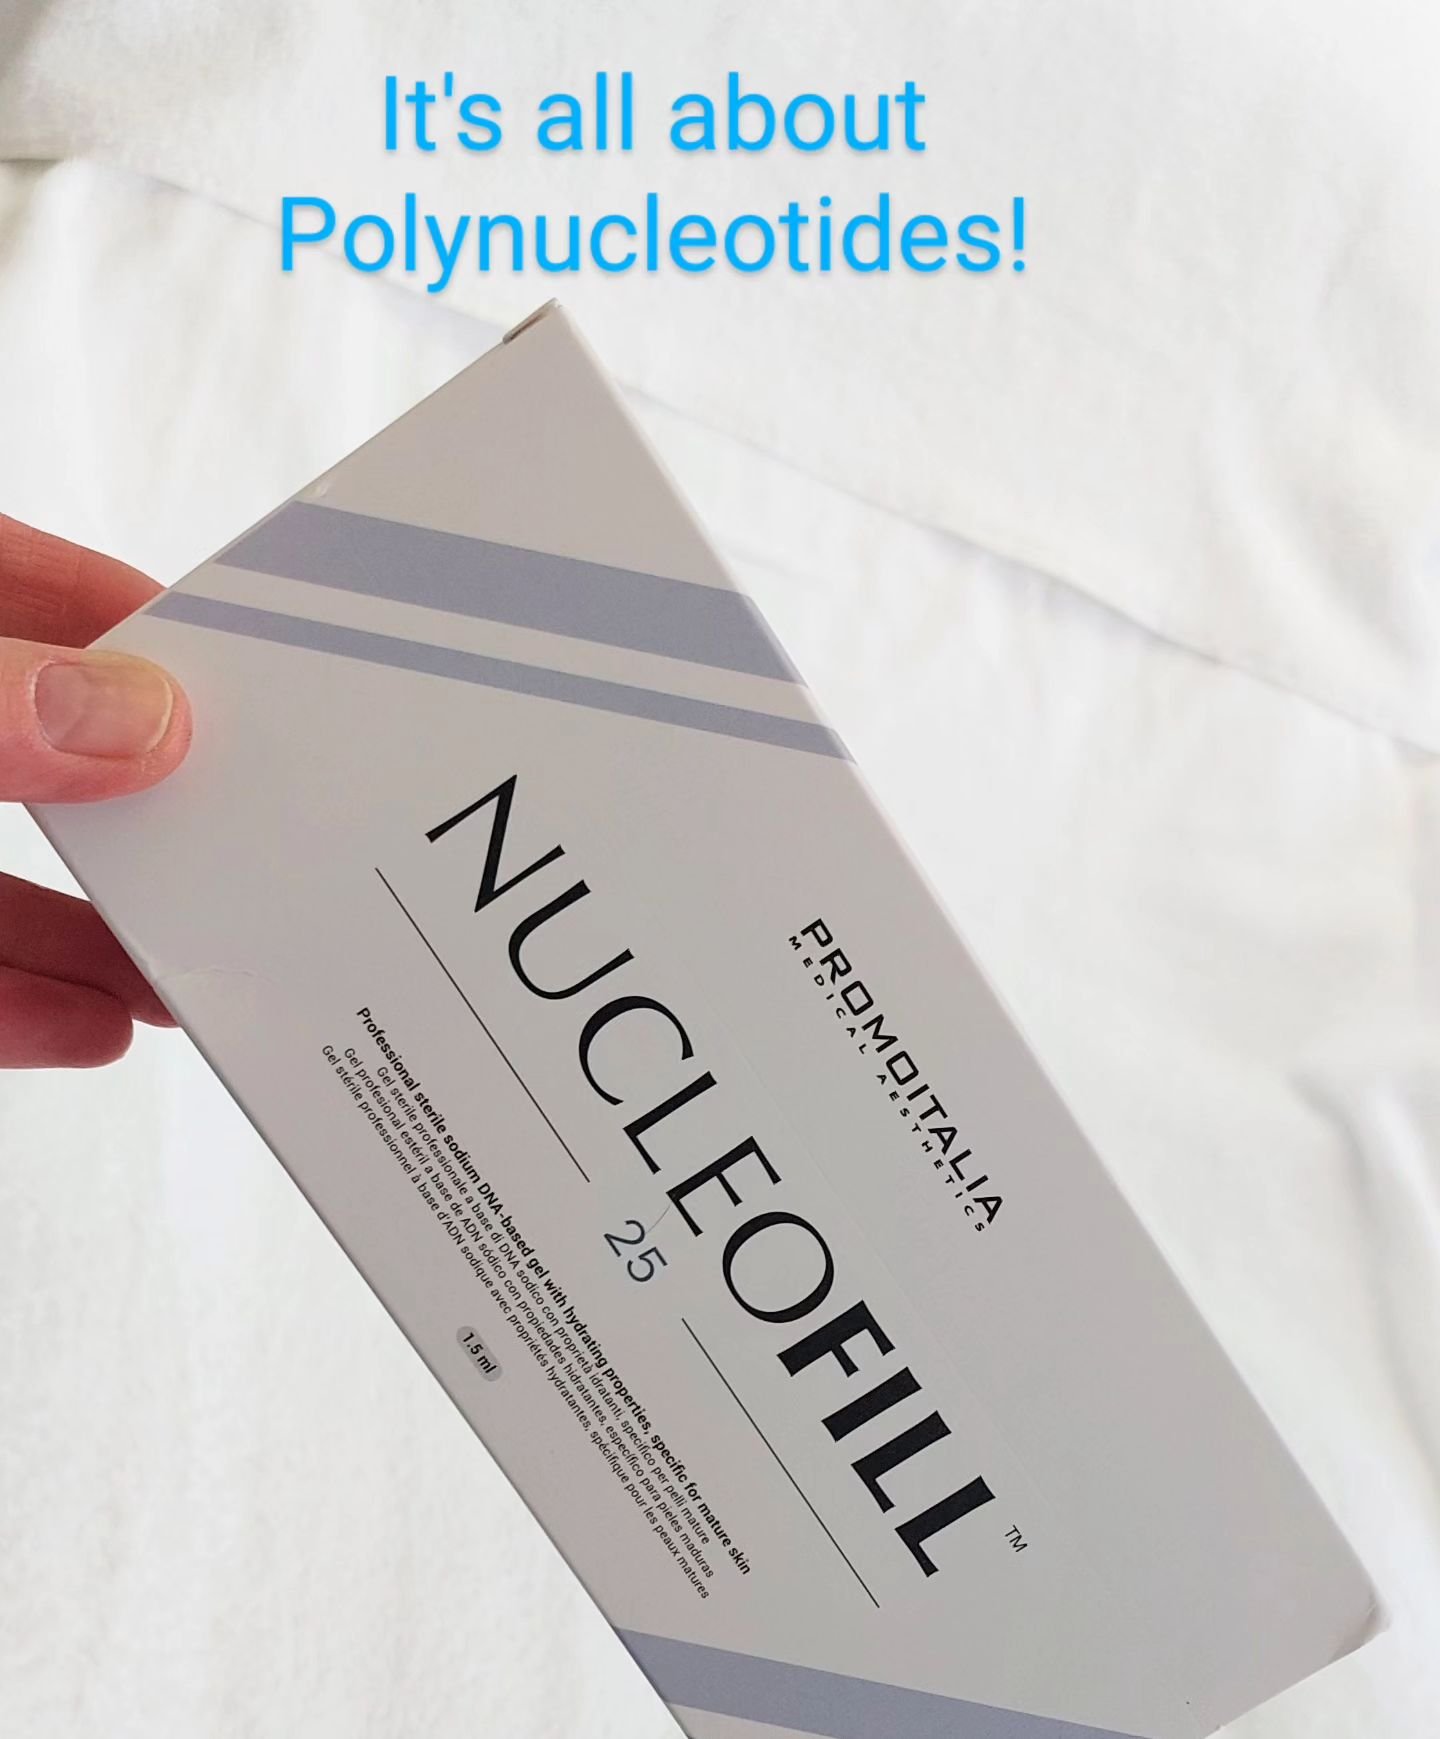 This week has all been about polynucleotides.
This injectable biostimulator kick-start the regeneration of your skin. PN's ate a natural way to improve your skin on a cellular level, boosting collagen and elastin by up regulating the fibroblasts cell